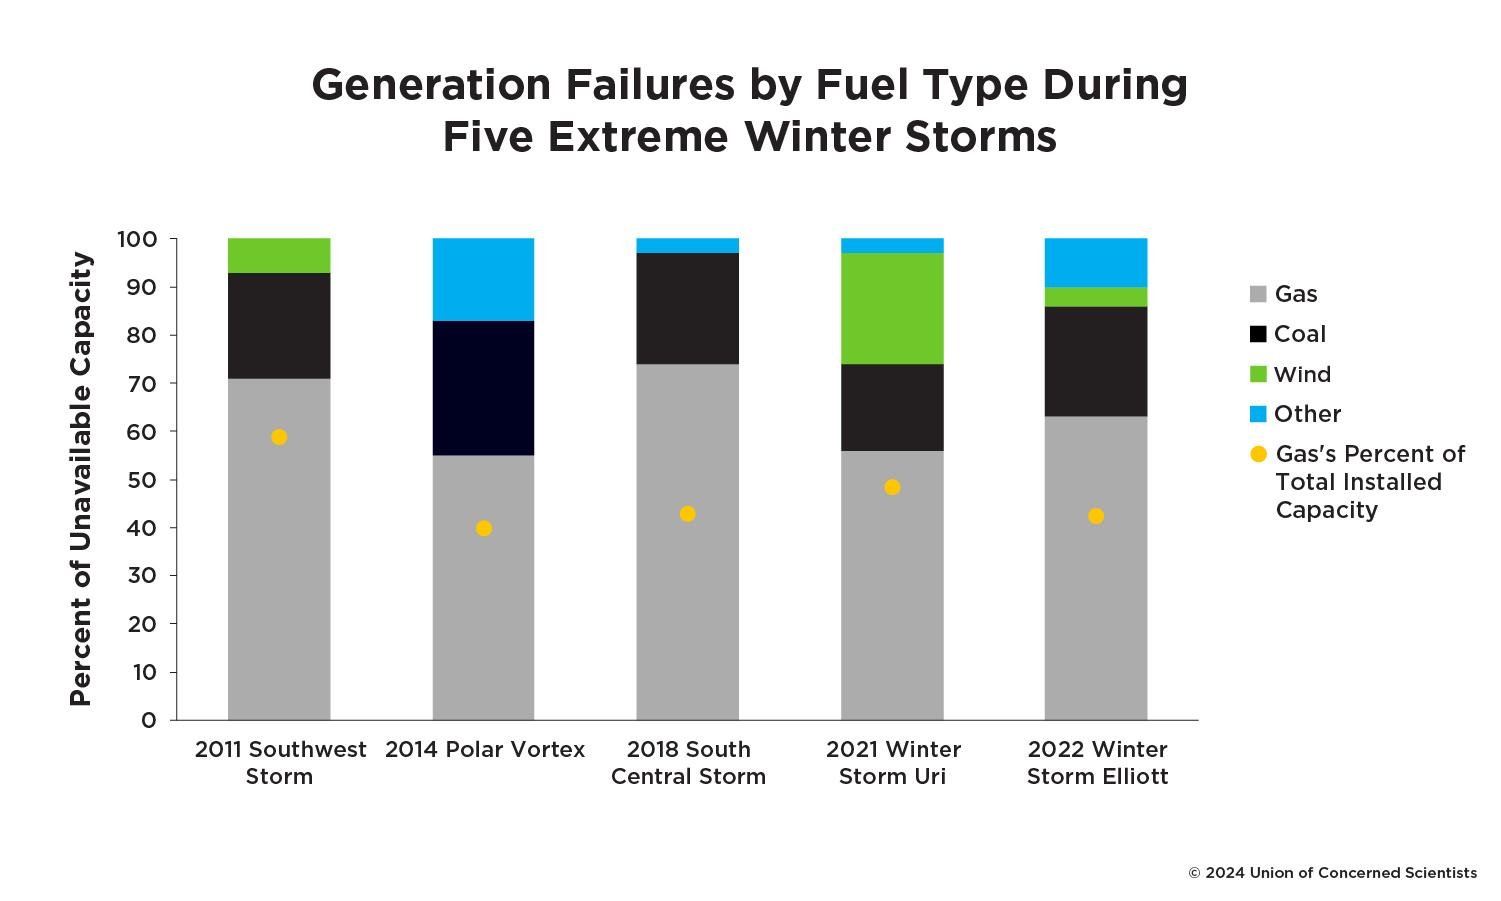 A figure labeled "Generation Failures by Fules Type During Five Extreme Winter Storms" showing that gas plants accounted for most of the failed capacity in five recent extreme winter weather events.